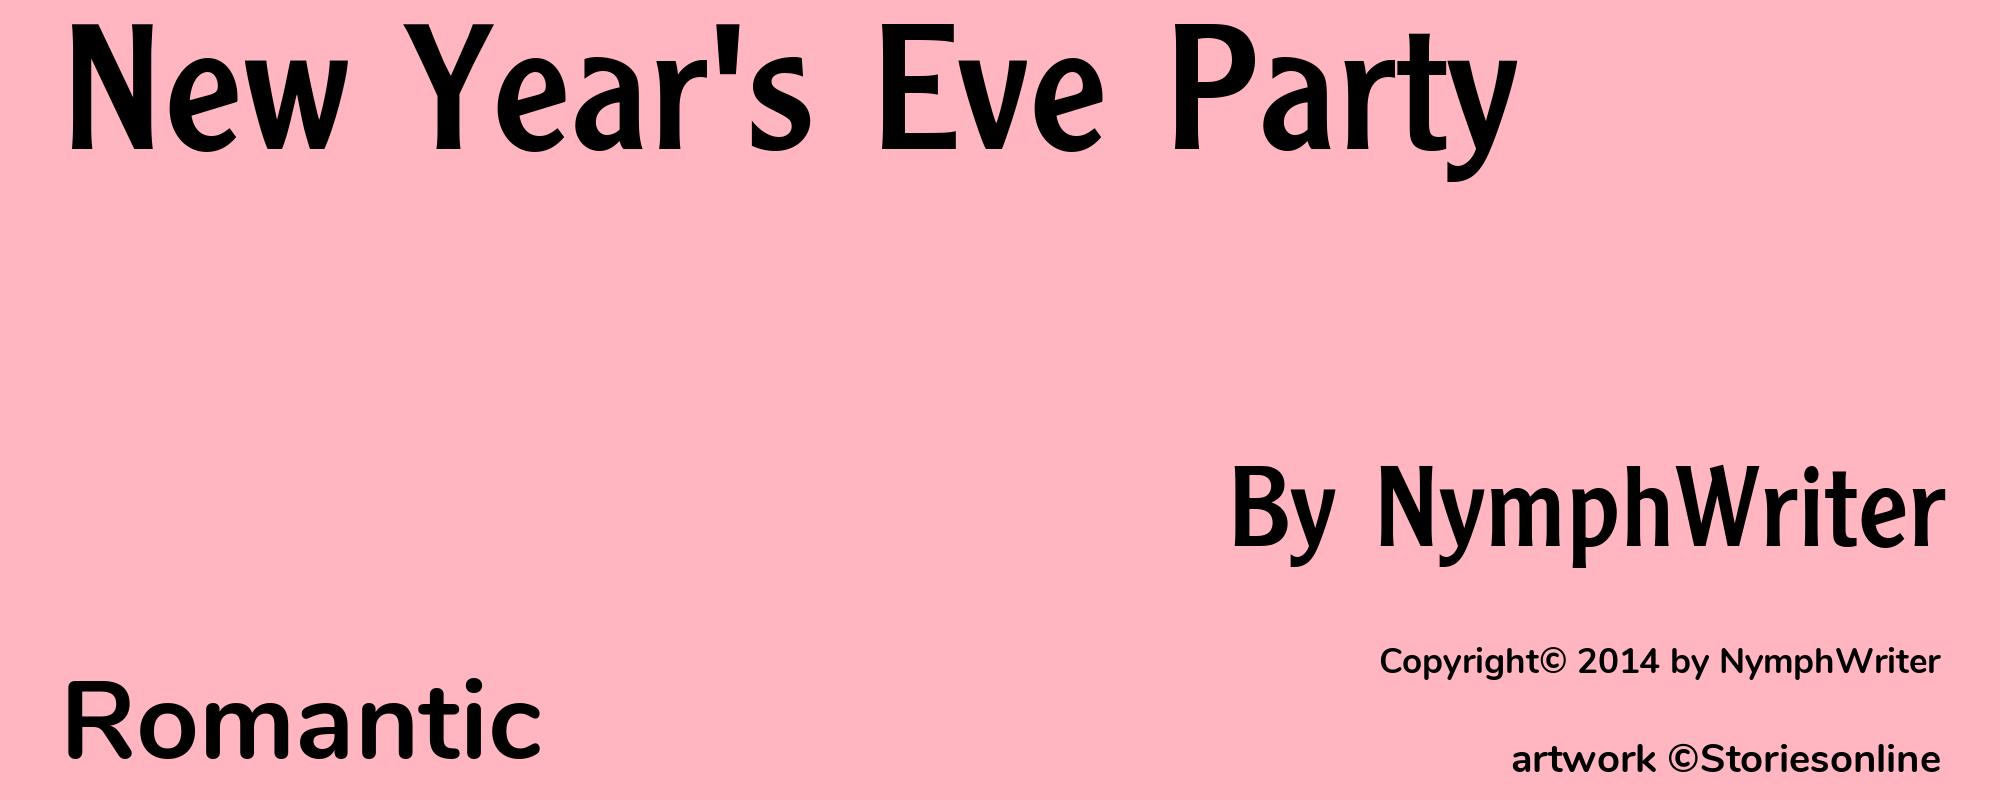 New Year's Eve Party - Cover